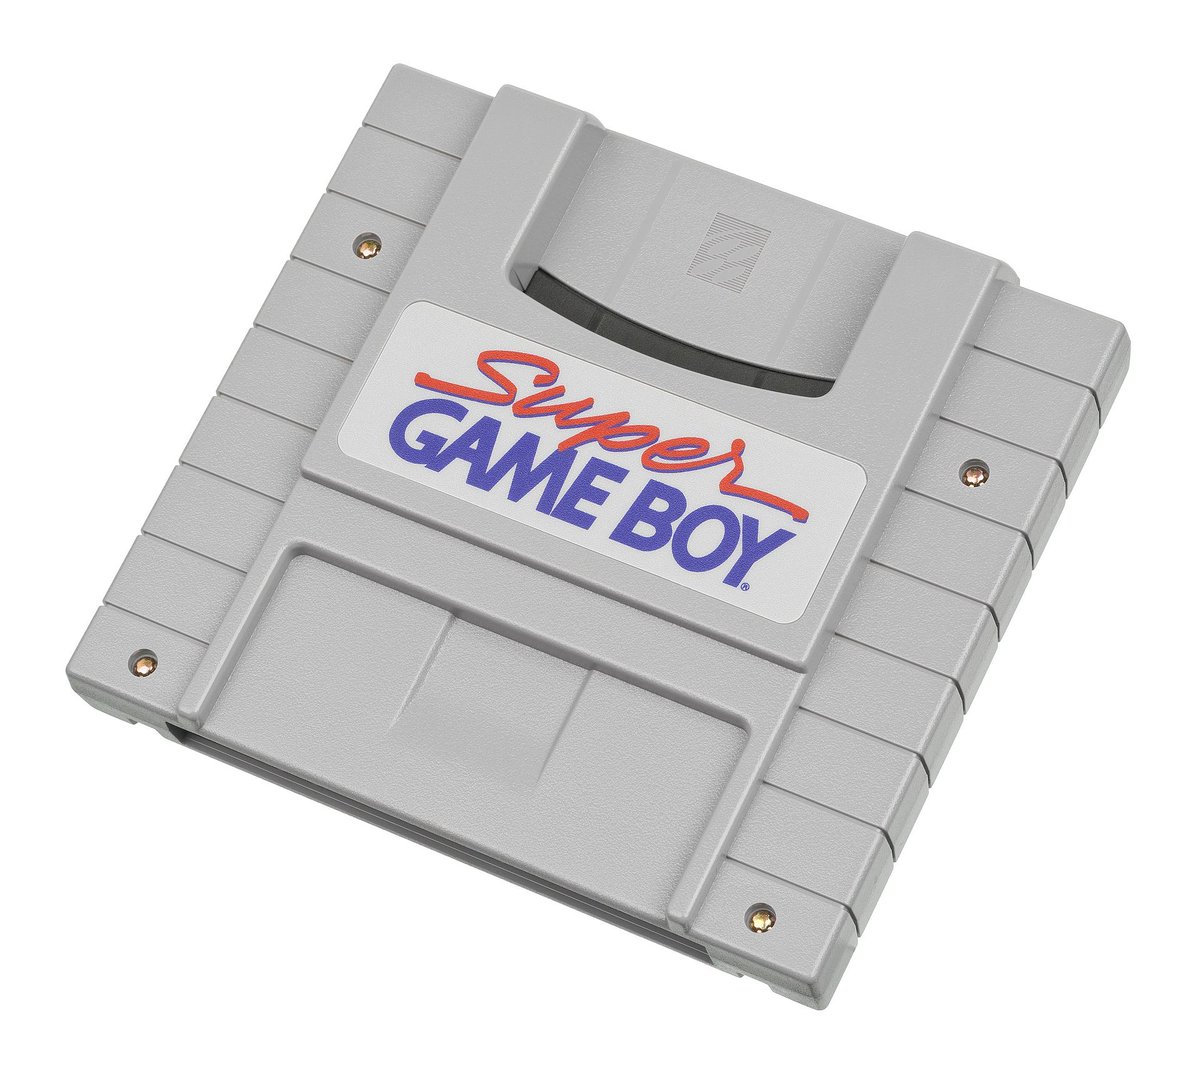 And one thing you might not really think of as a "enhancement chip" but arguably is one is the Sharp LR35902 in the Super Game Boy adapter, used to play Game Boy games on the SNES.Rather than try to emulate the Game Boy on the SNES, they just included the CPU in the cart!